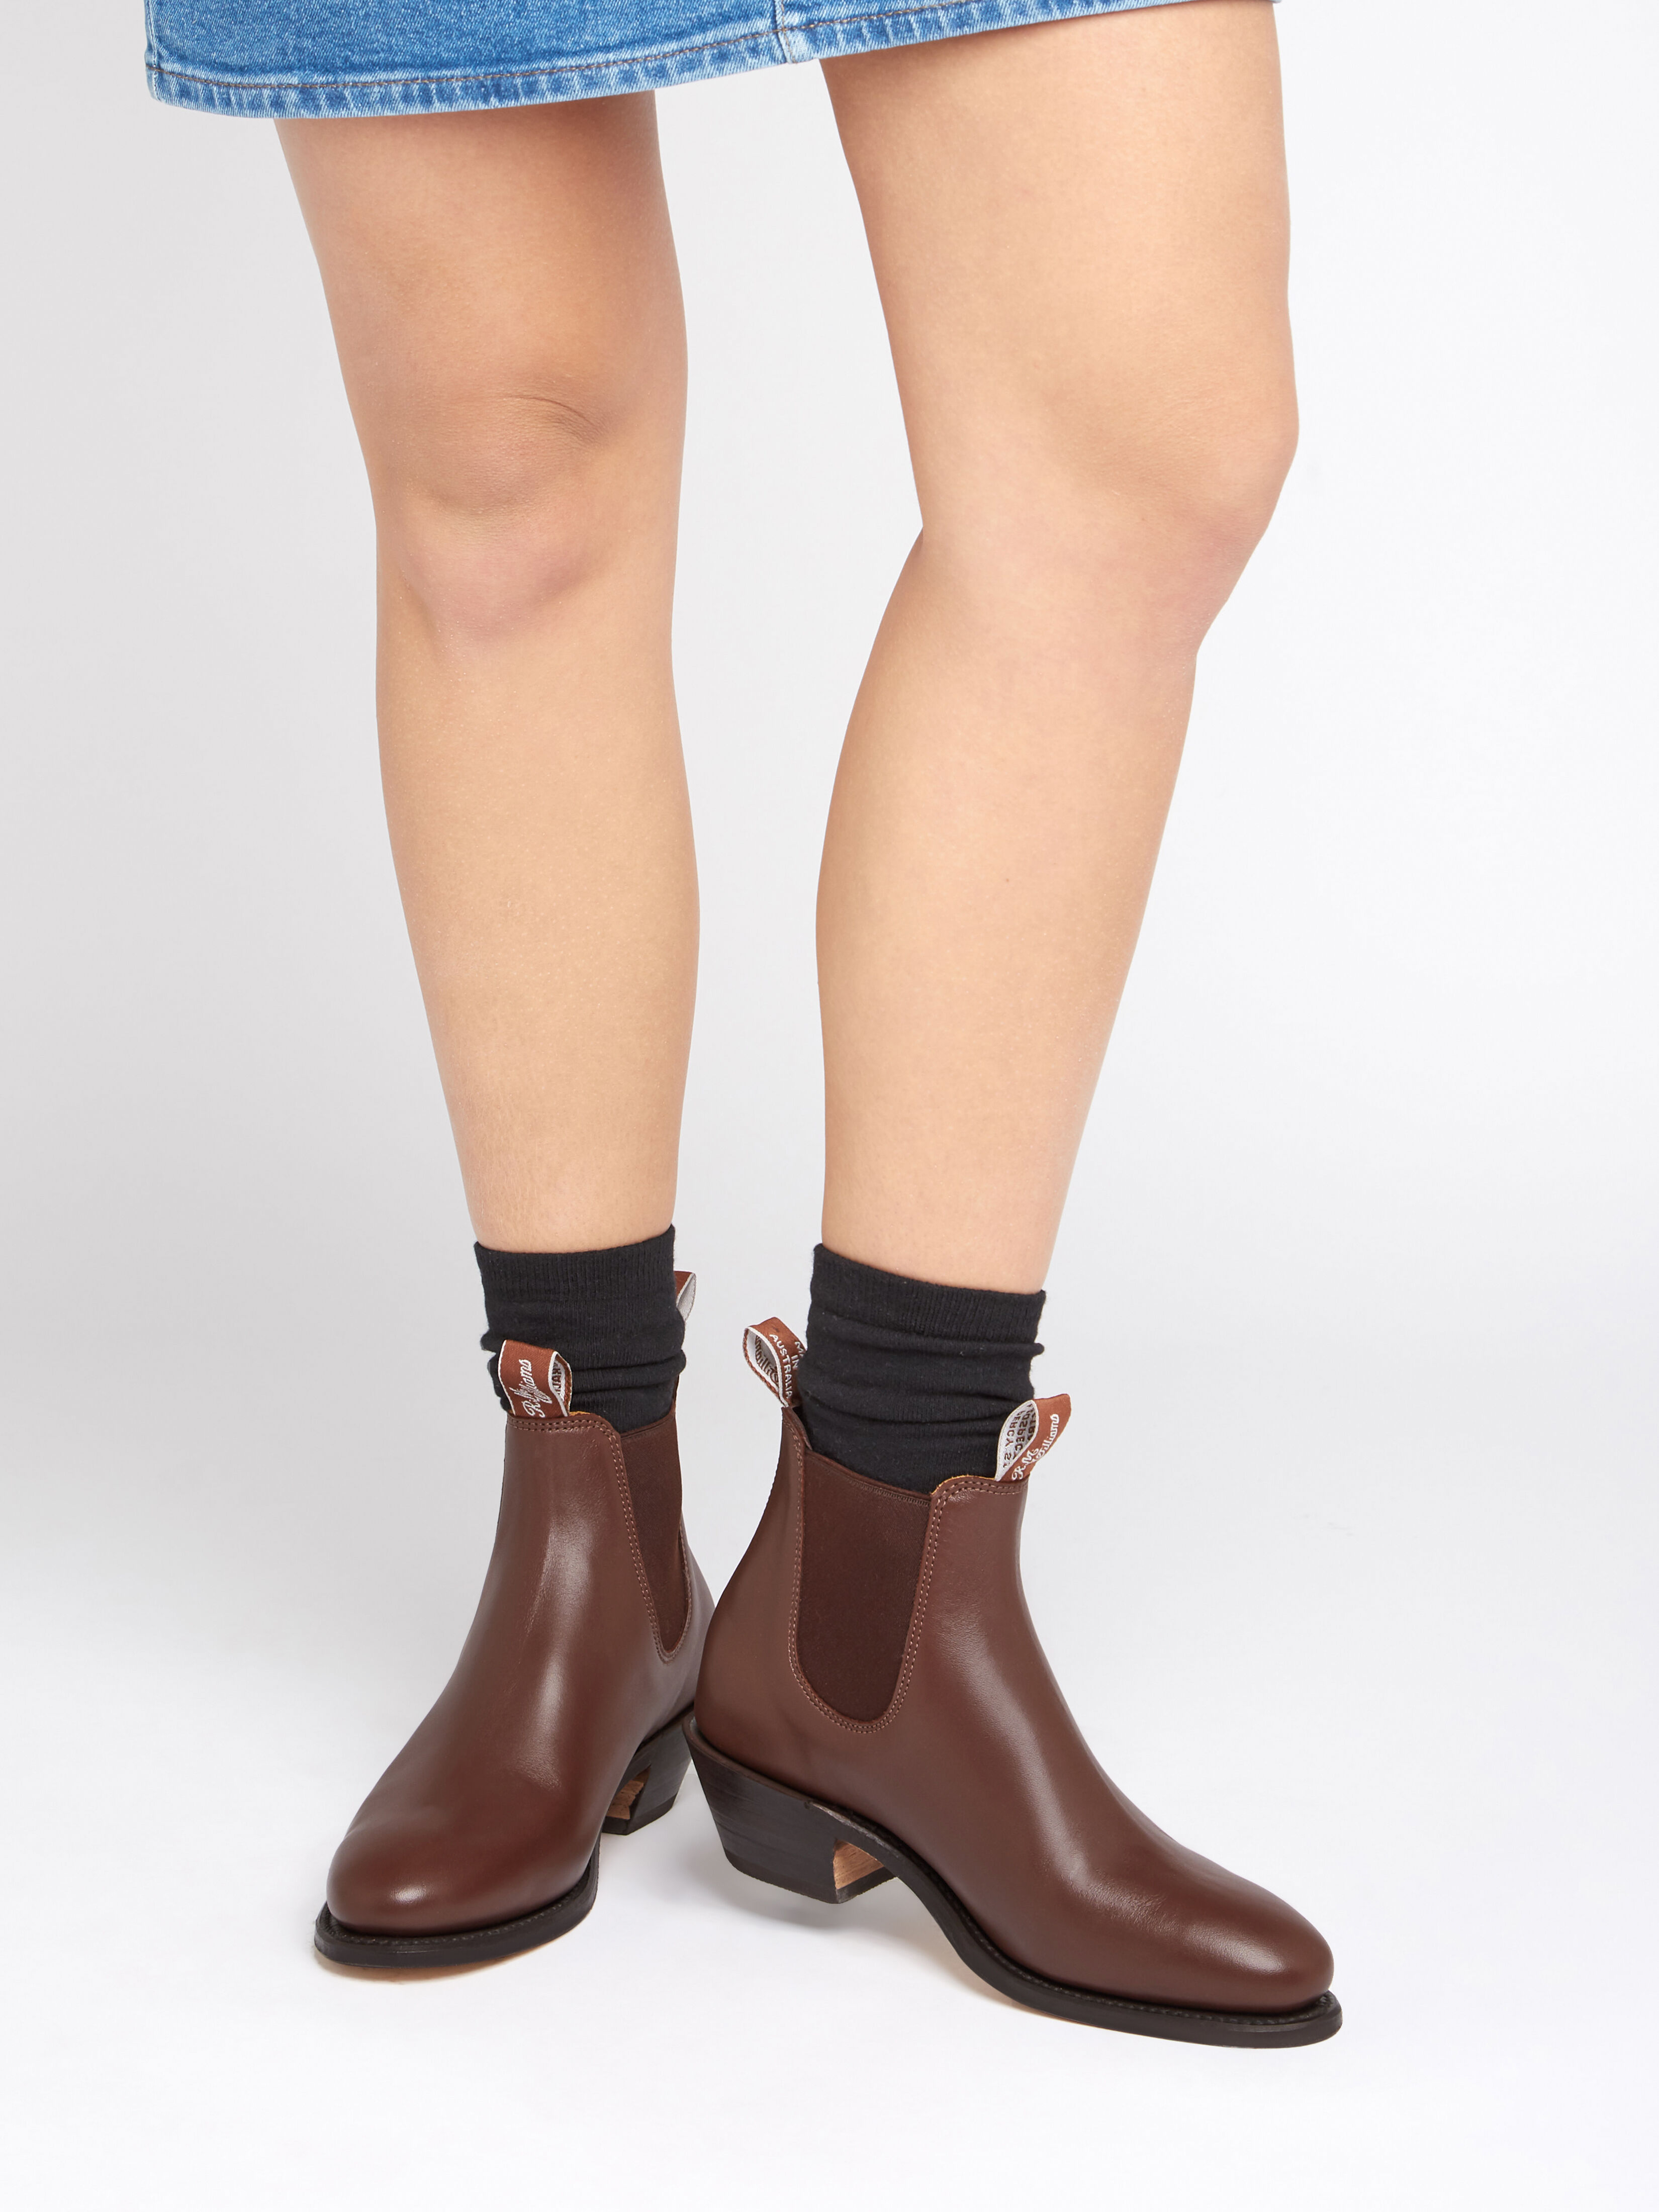 rm williams female boots